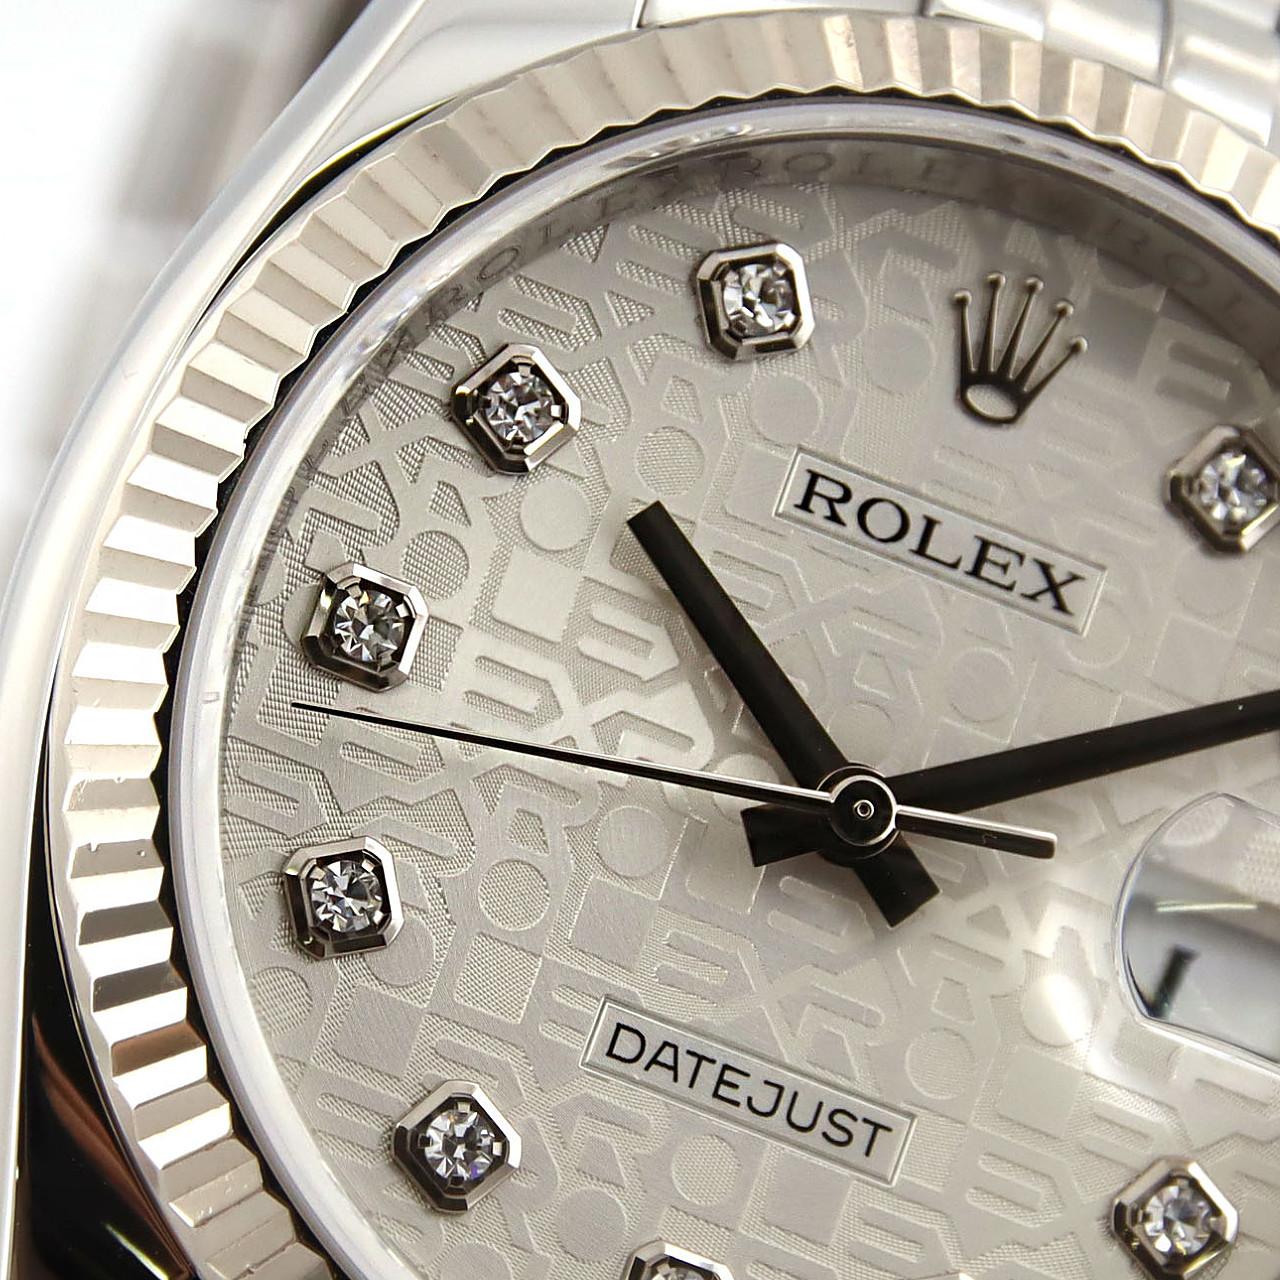 ROLEX Datejust 116234G SSxWG Automatic G number